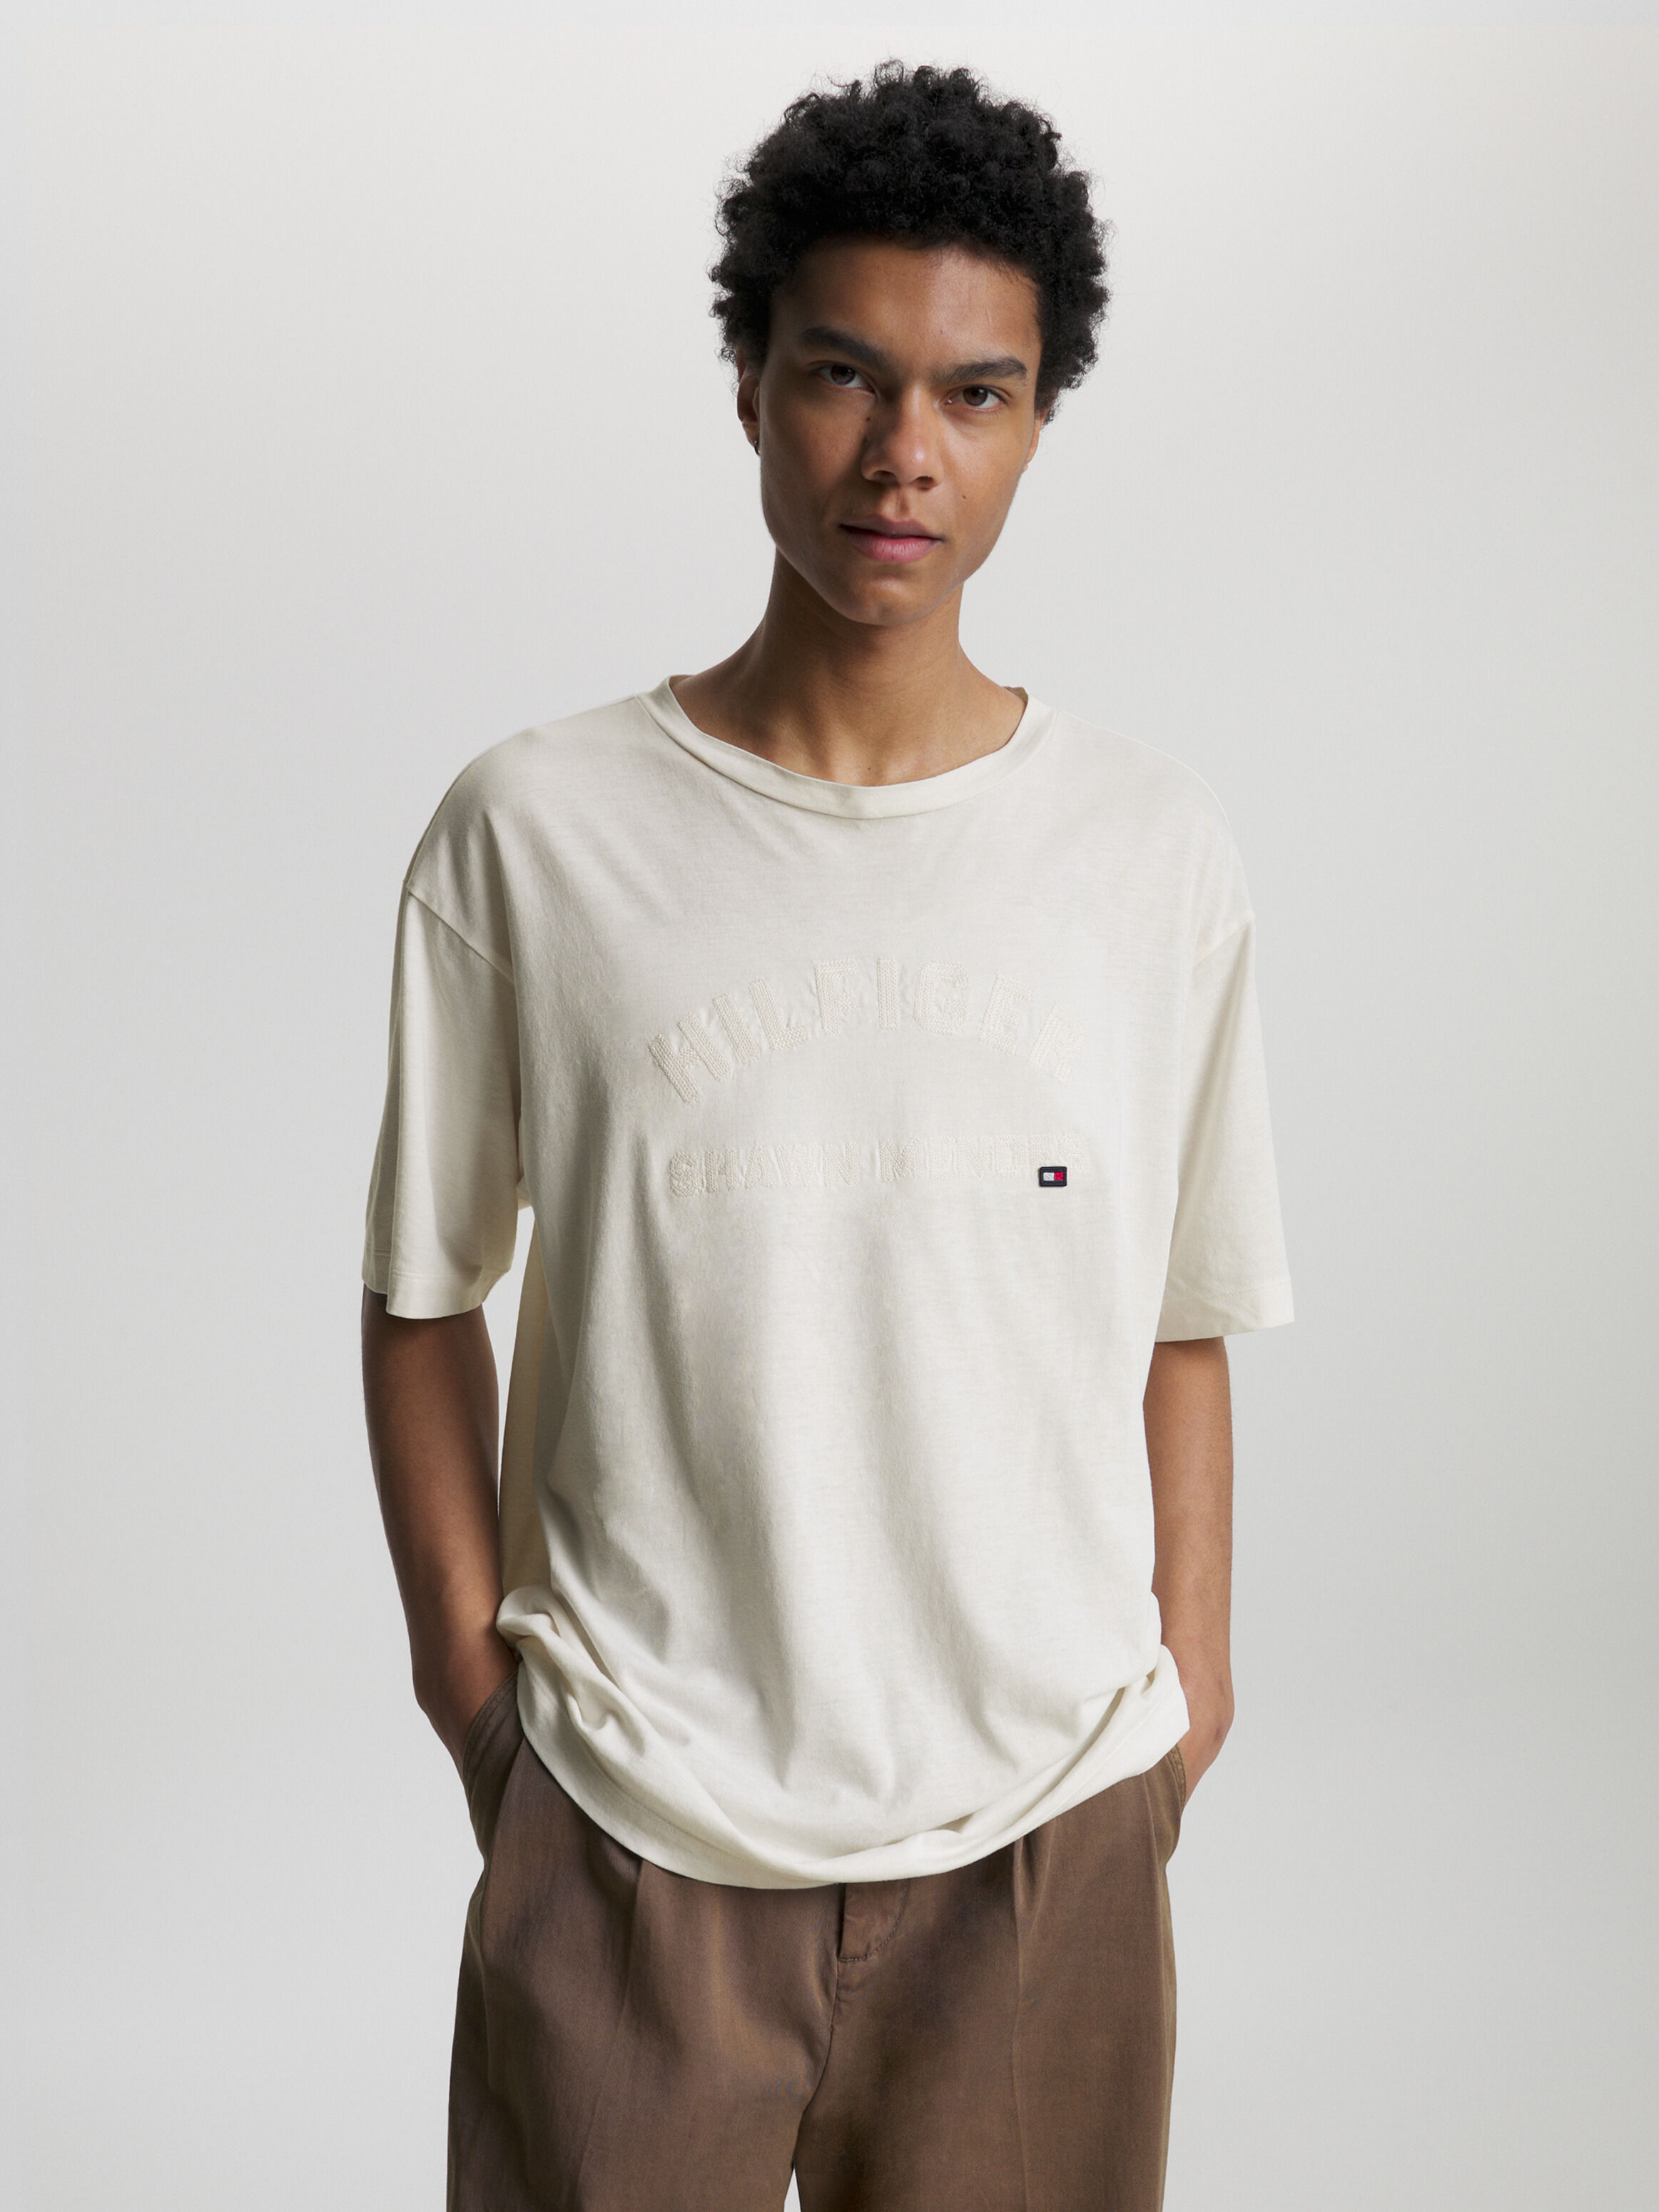 Tommy Hilfiger X Shawn Mendes 復刻 T 恤 Weathered White